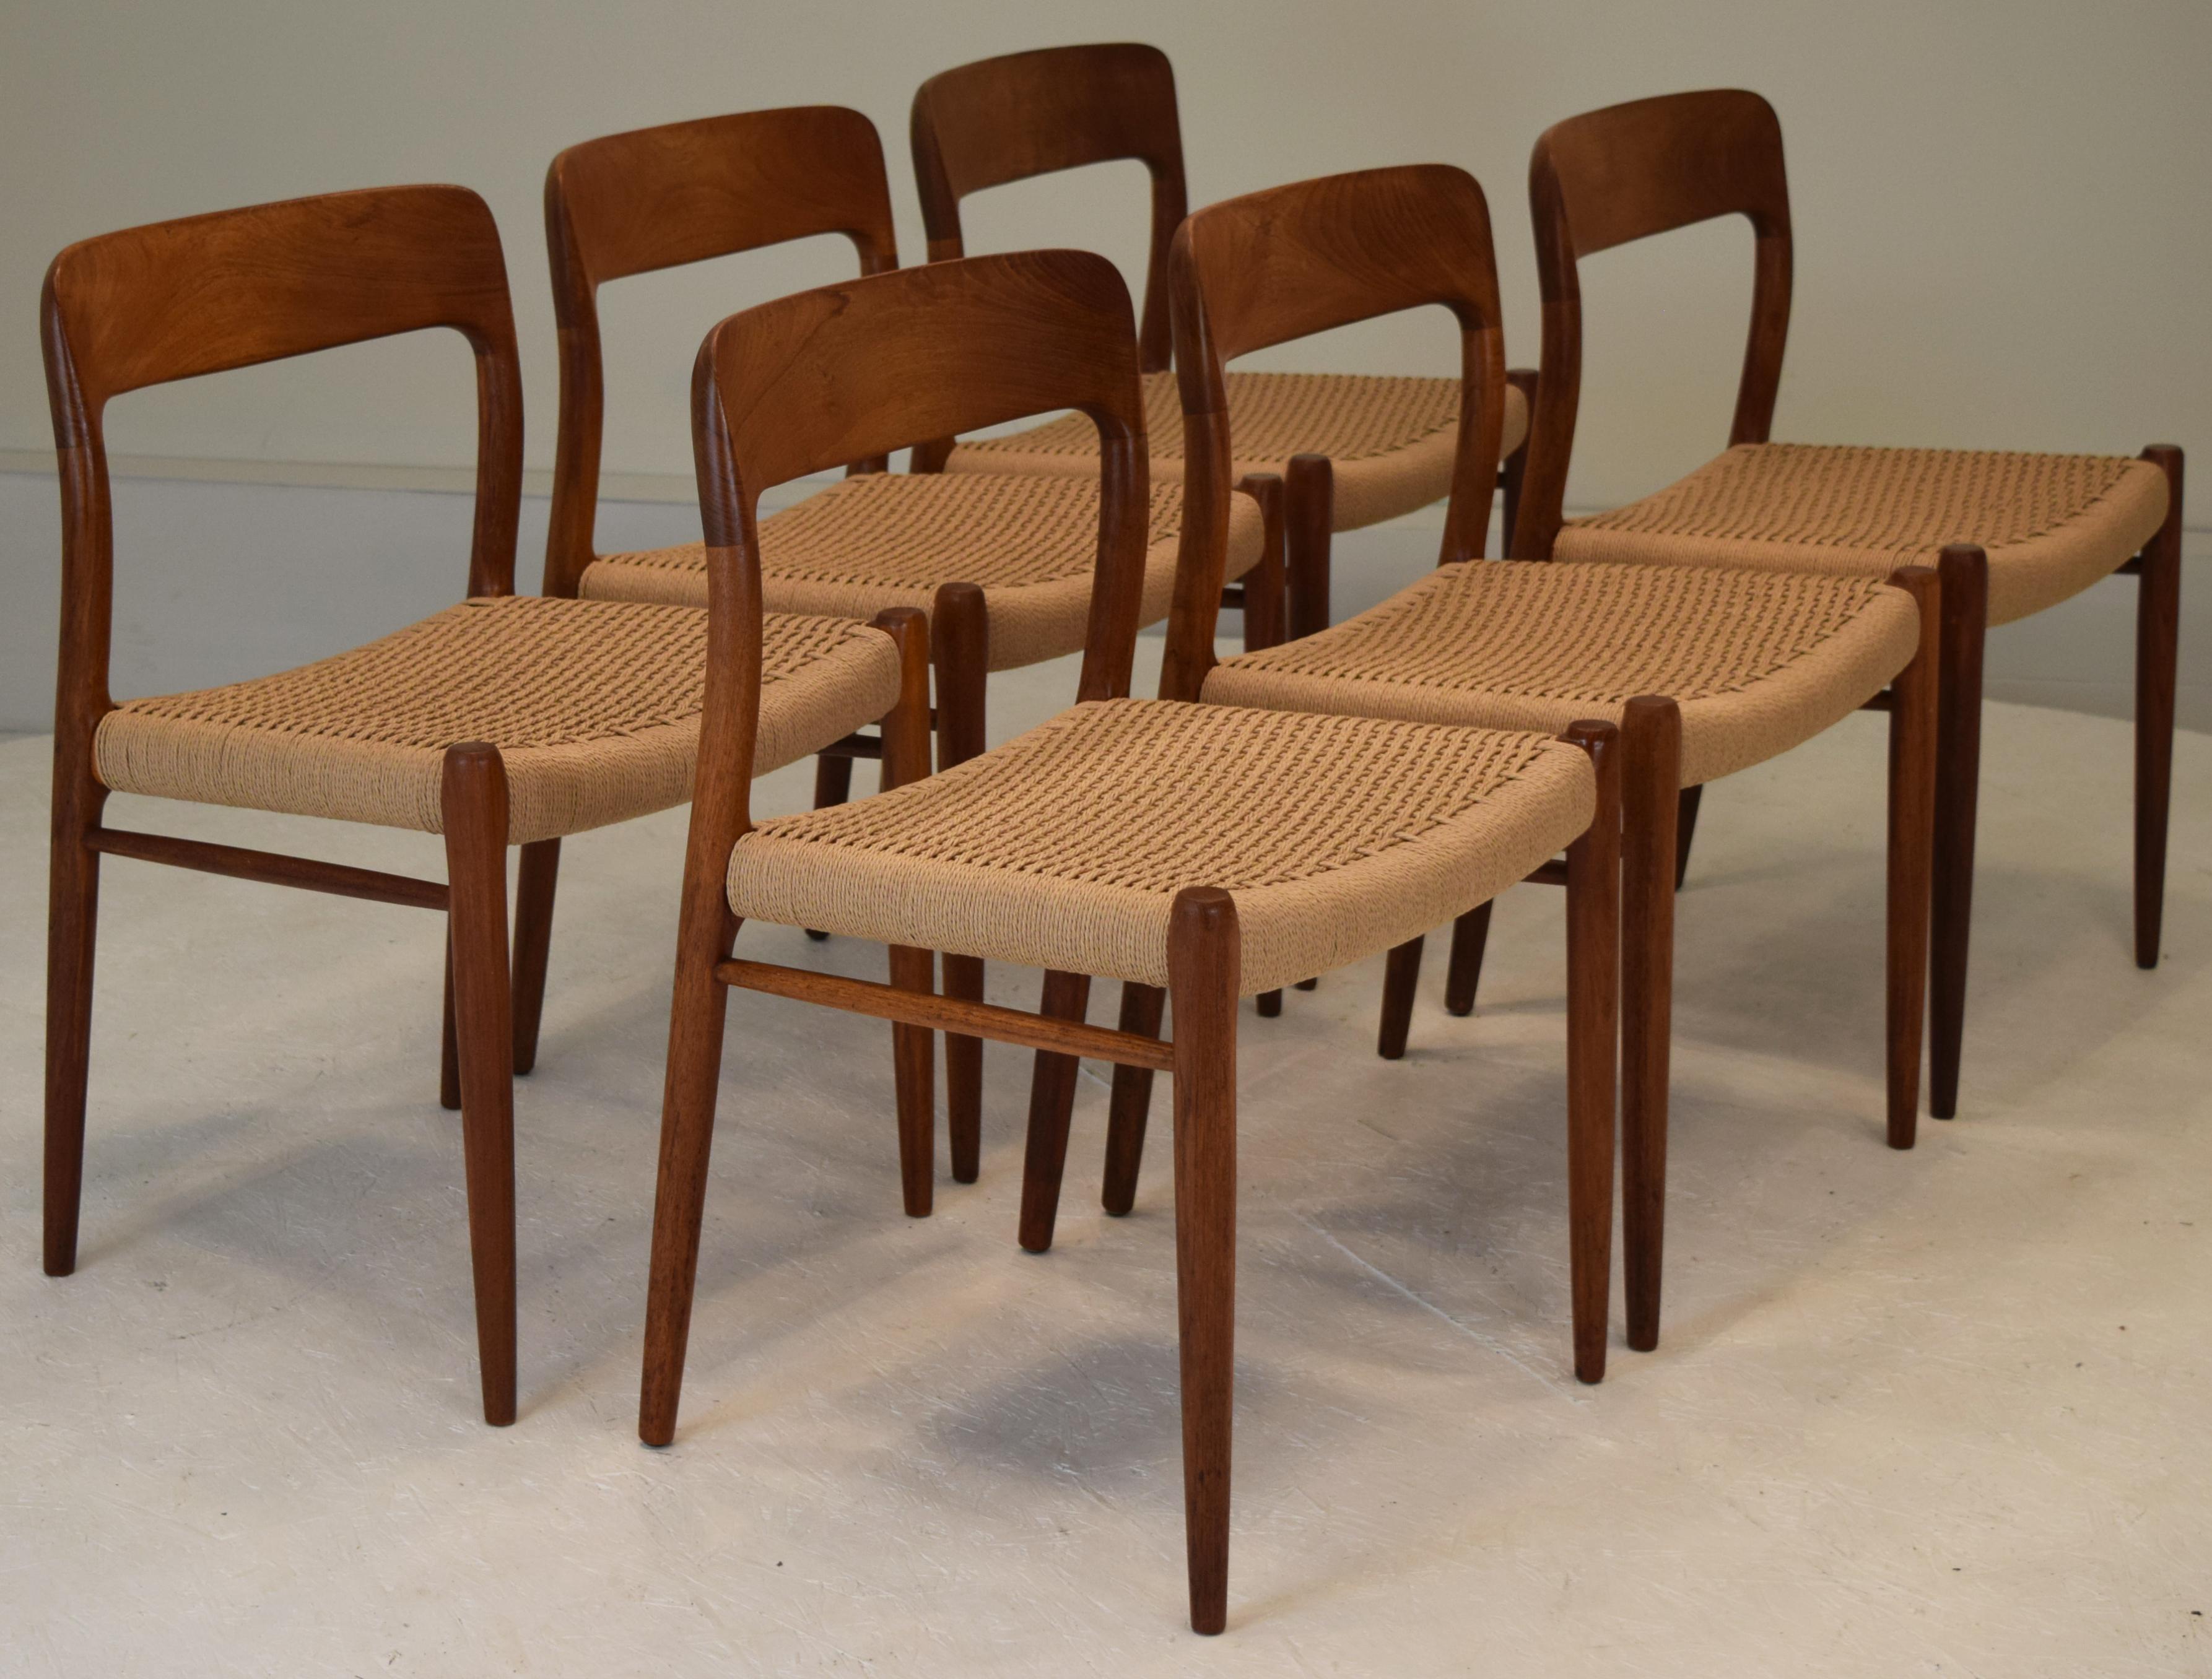 These are genuine vintage with each and every chair having the old makers mark and steel medallions by Niels O. Møller for J. L. Møller. Set of 6. Many claim to be vintage but are in fact more recent production dining chairs. These have been